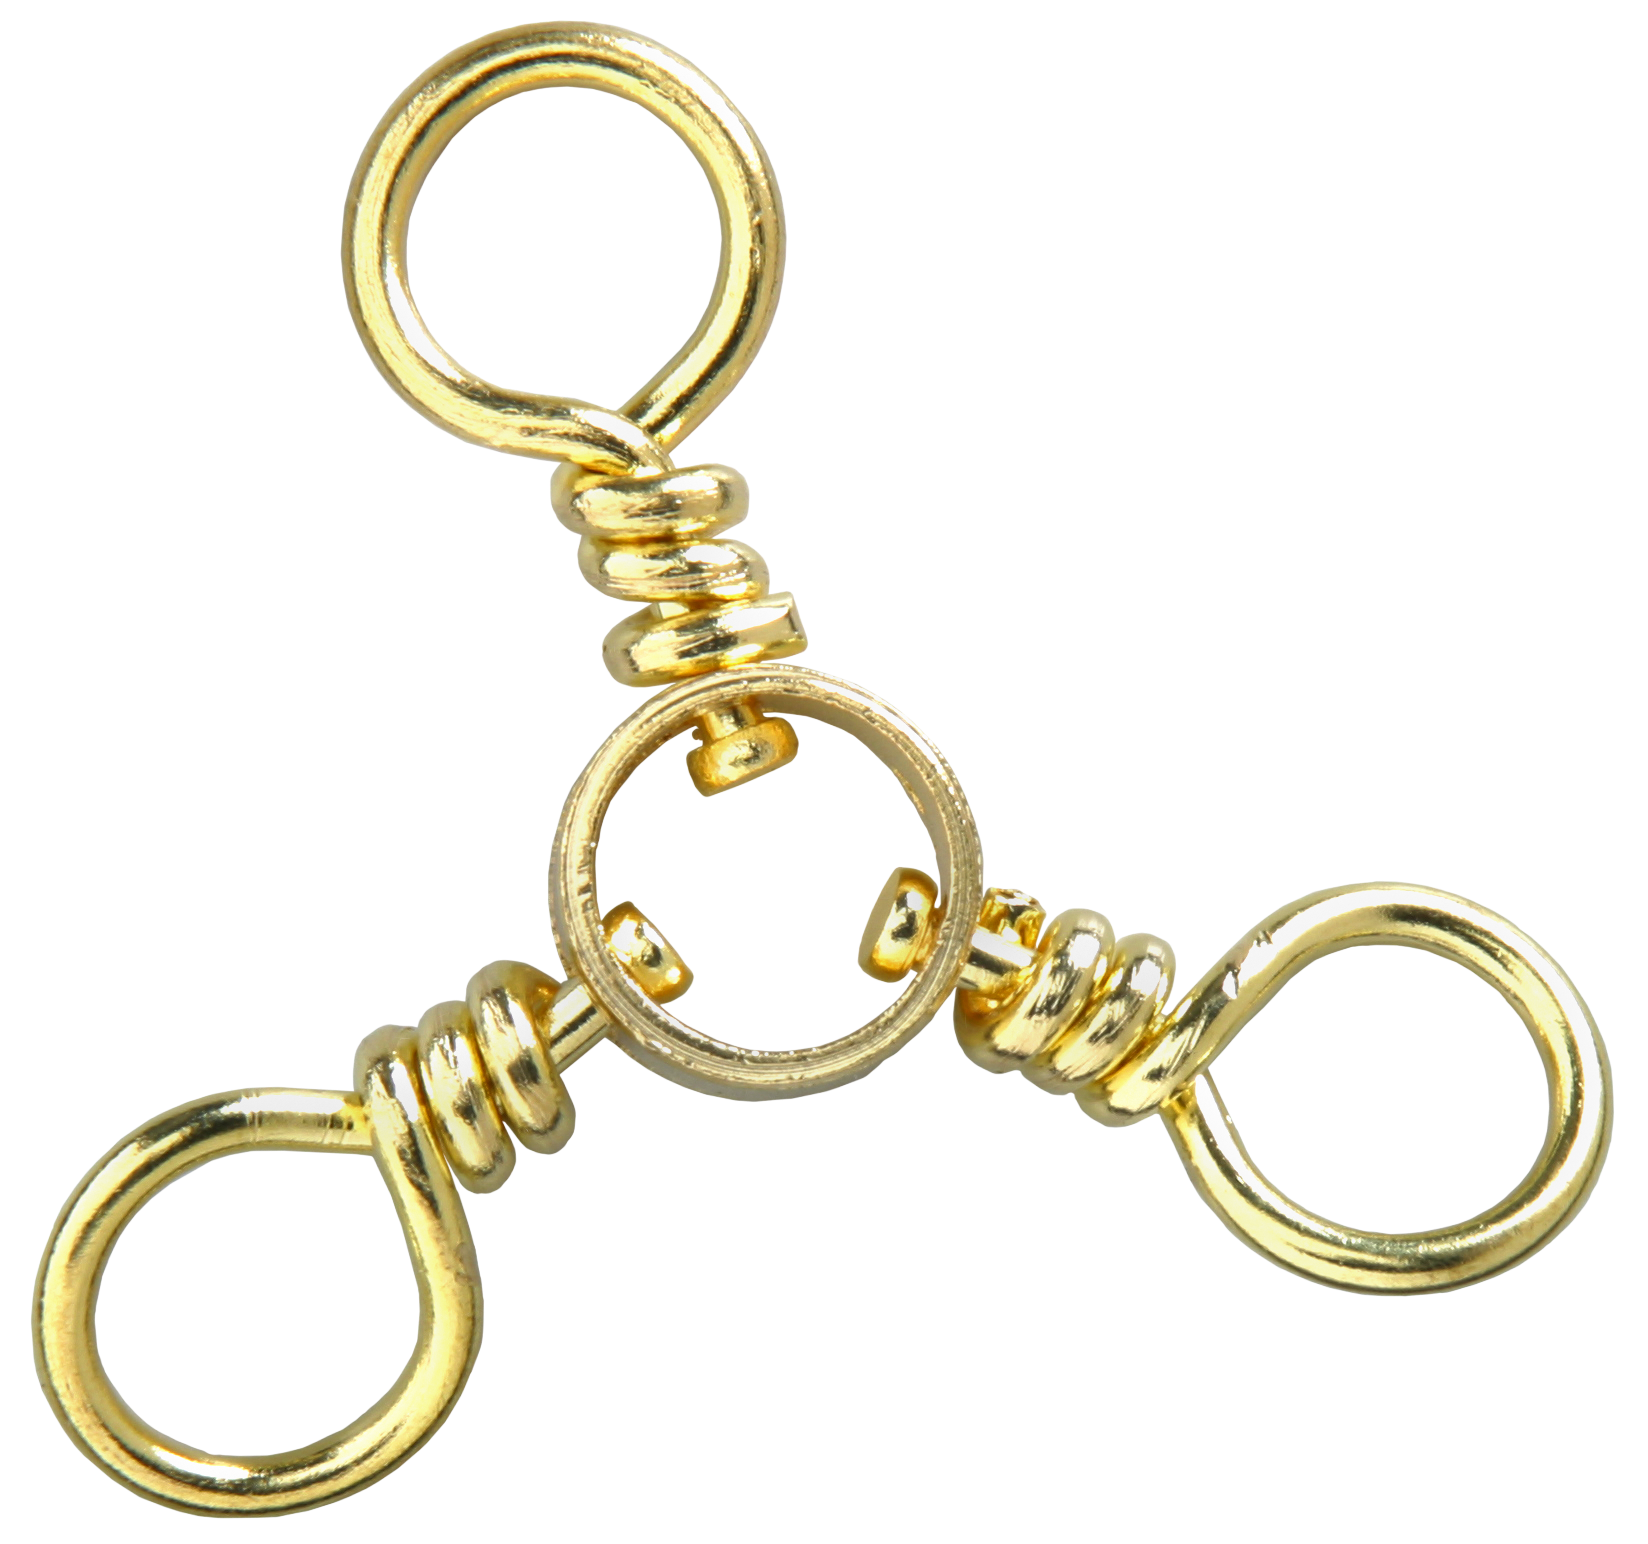 36 count - 3 way swivels, size # 2 Brass findish Danielson 1800SP-2